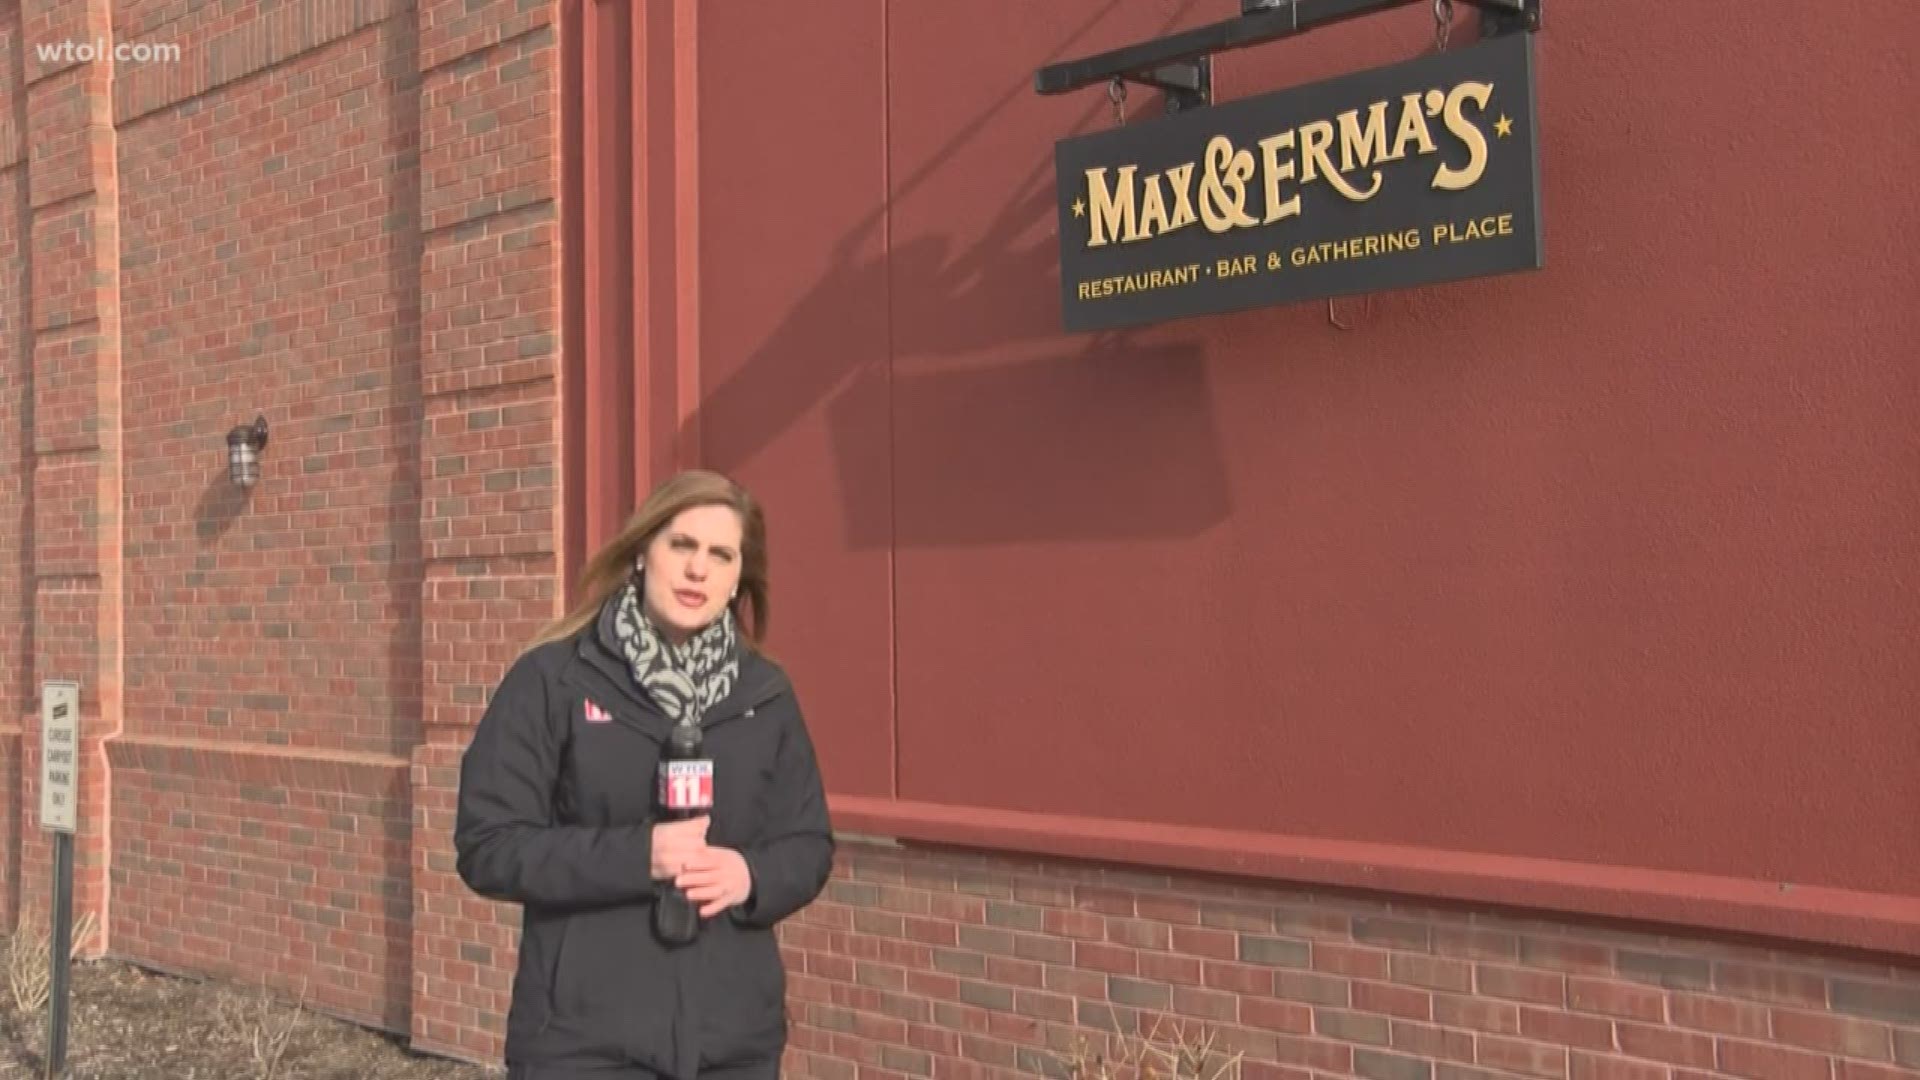 According to a corporate representative for Max and Erma's, the final day for the Levis Commons location is Jan. 12.